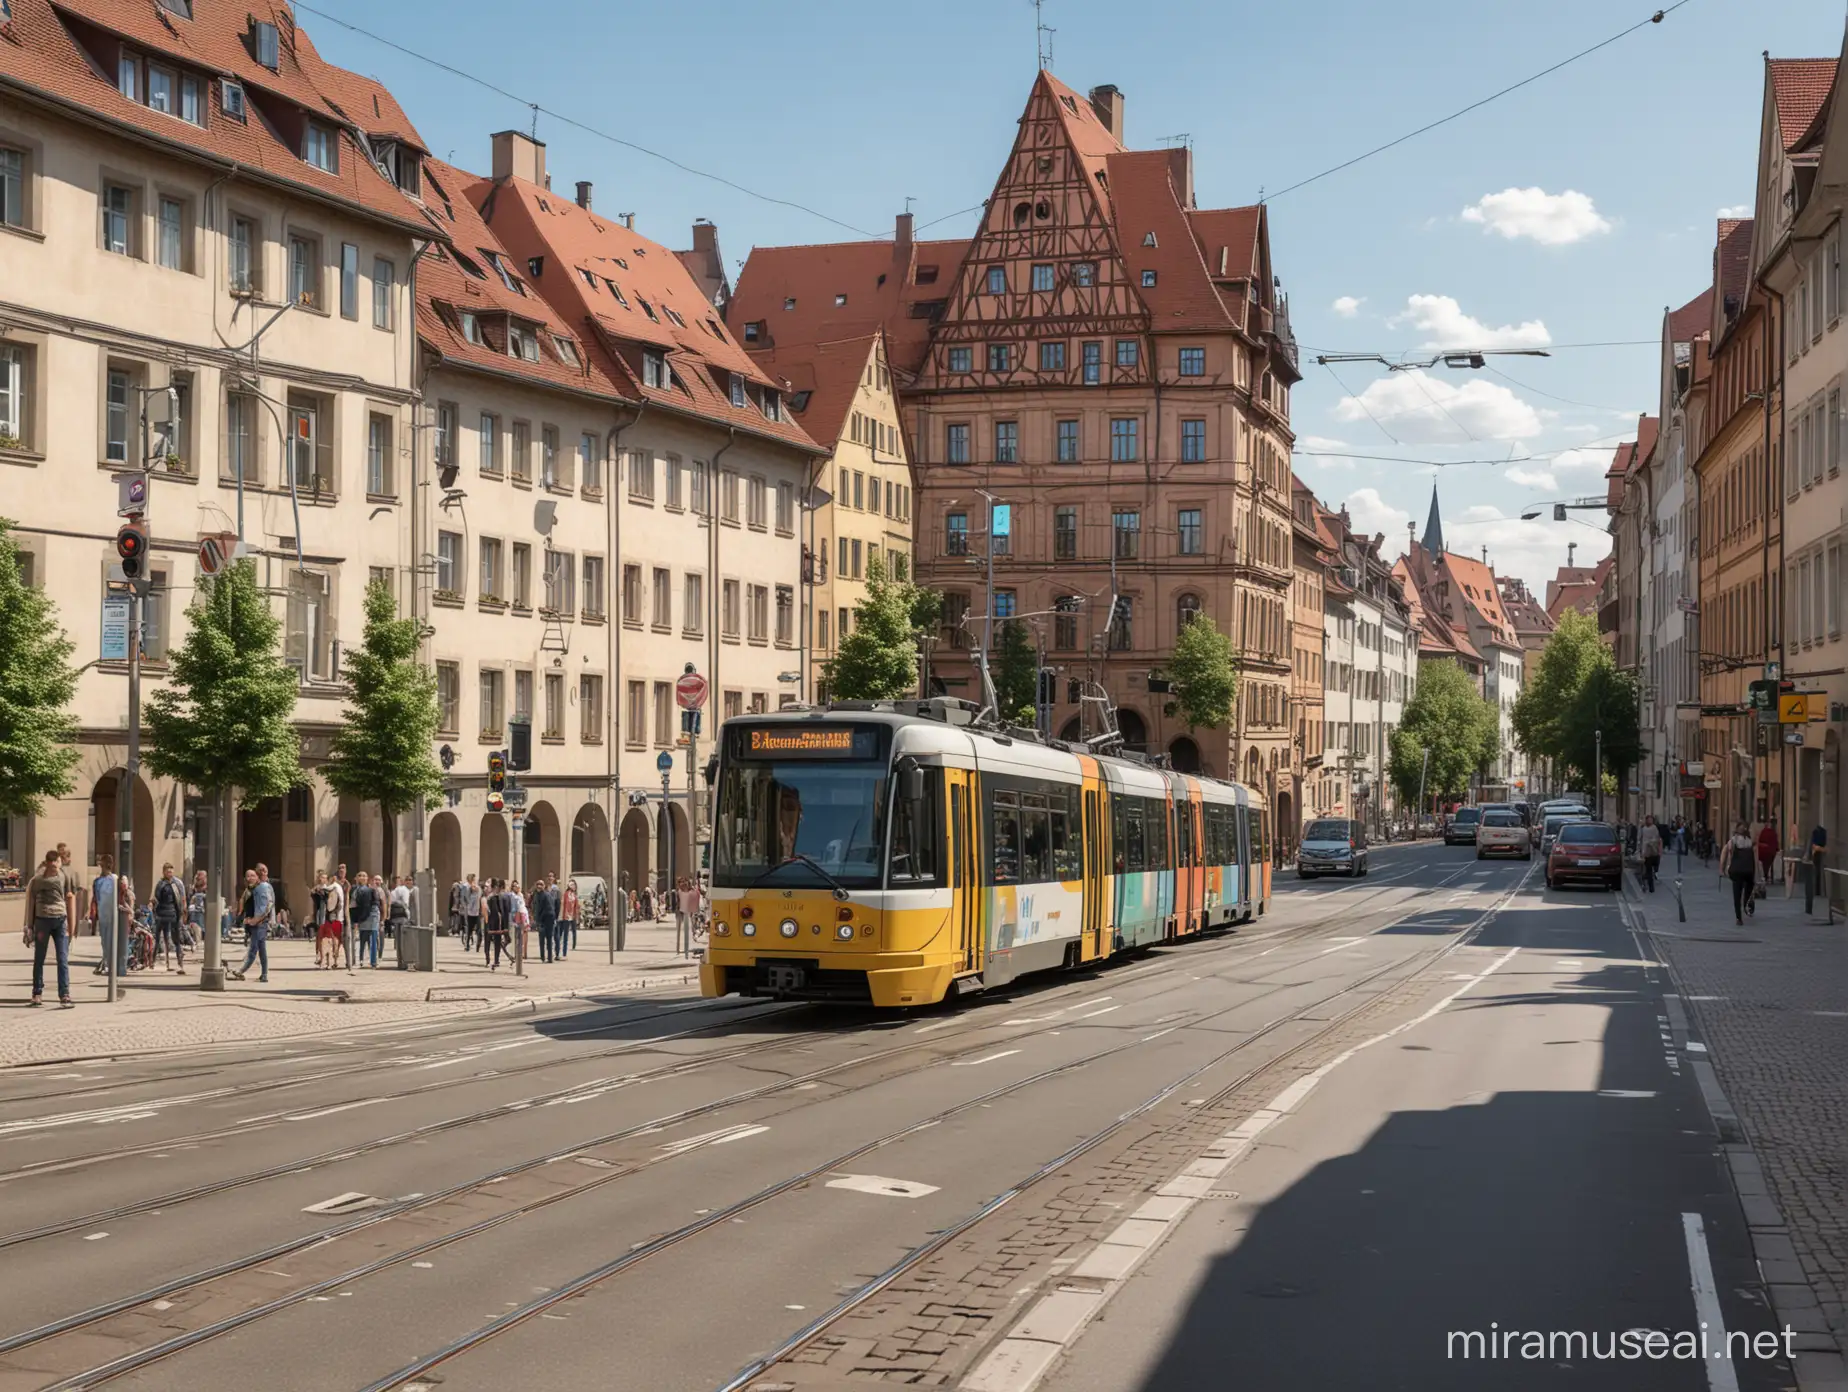 Comic Style Nuremberg Street Scene with Tram and Waiting Cars